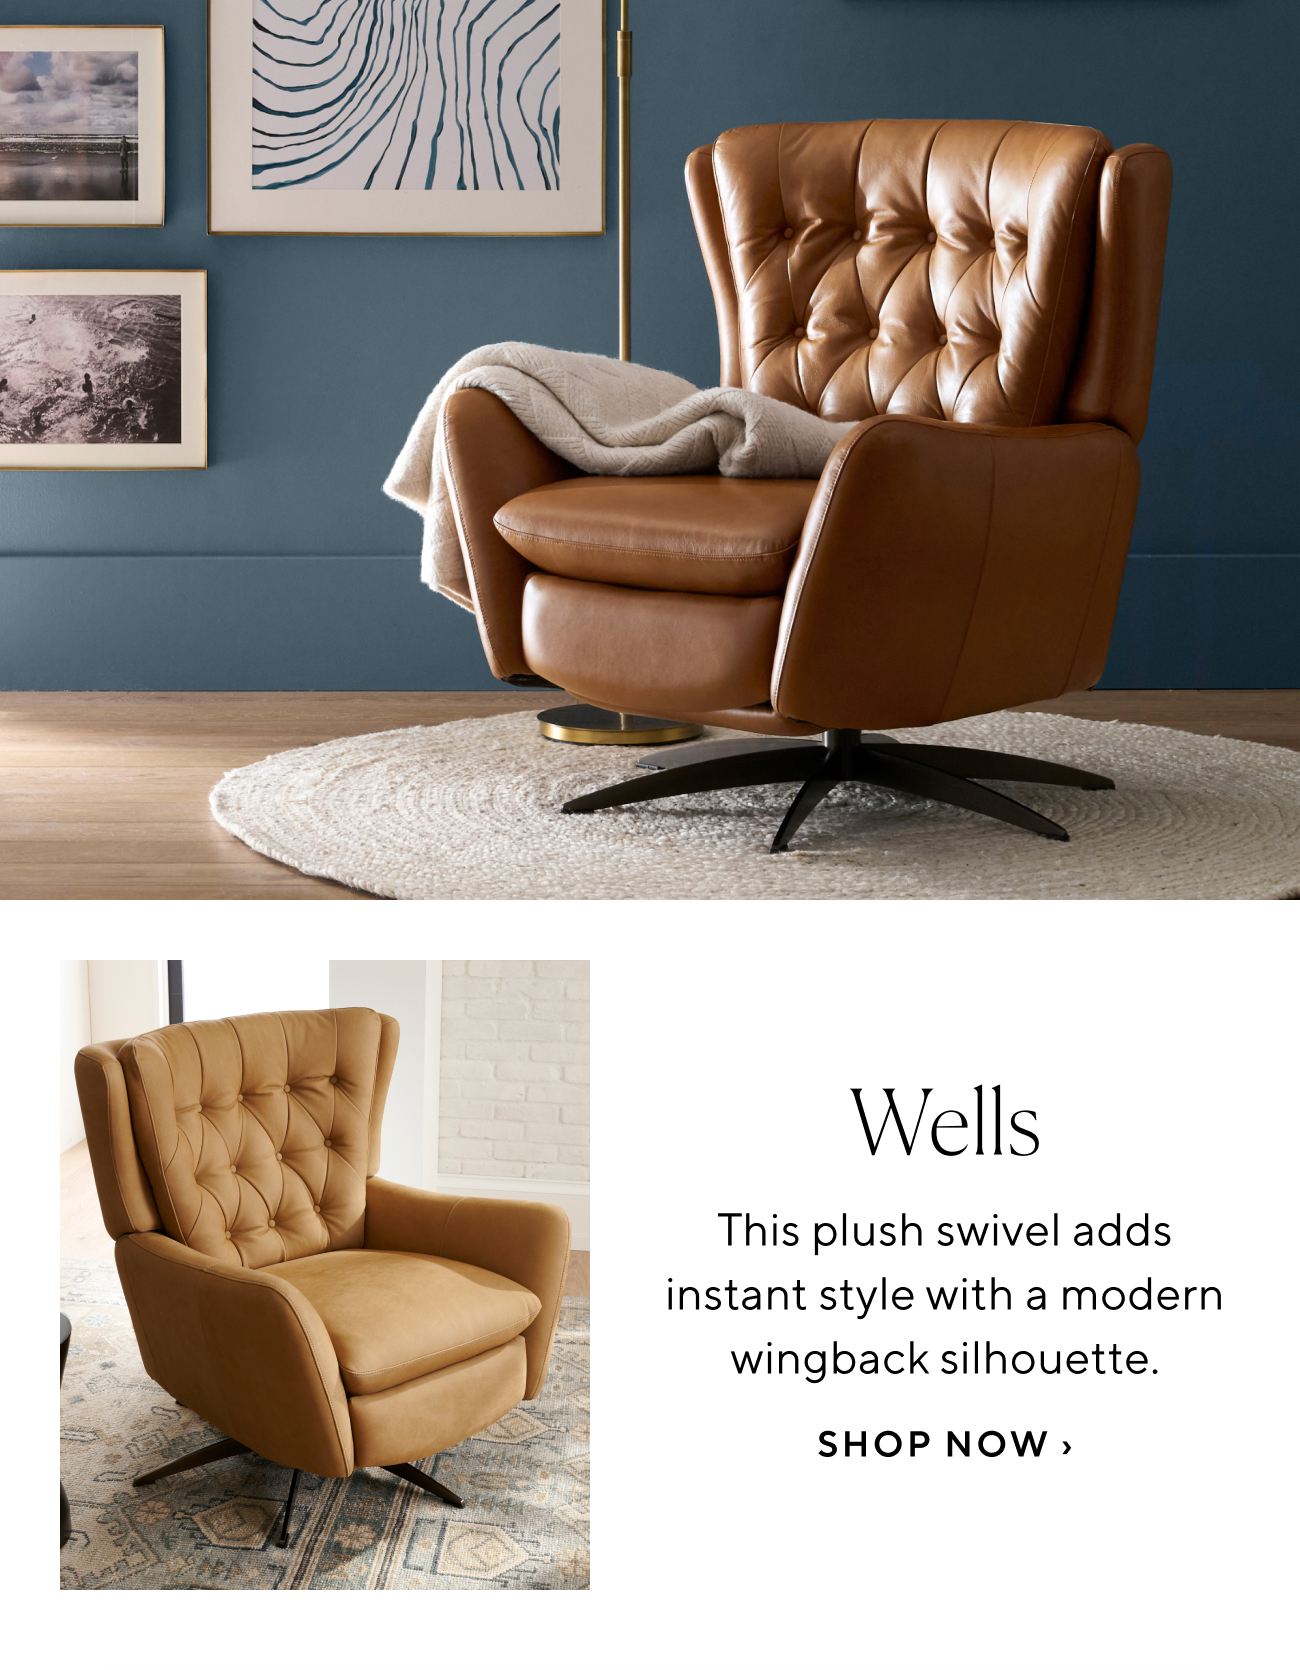  Wells This plush swivel adds instant style with a modern wingback silhouette. SHOP NOW 